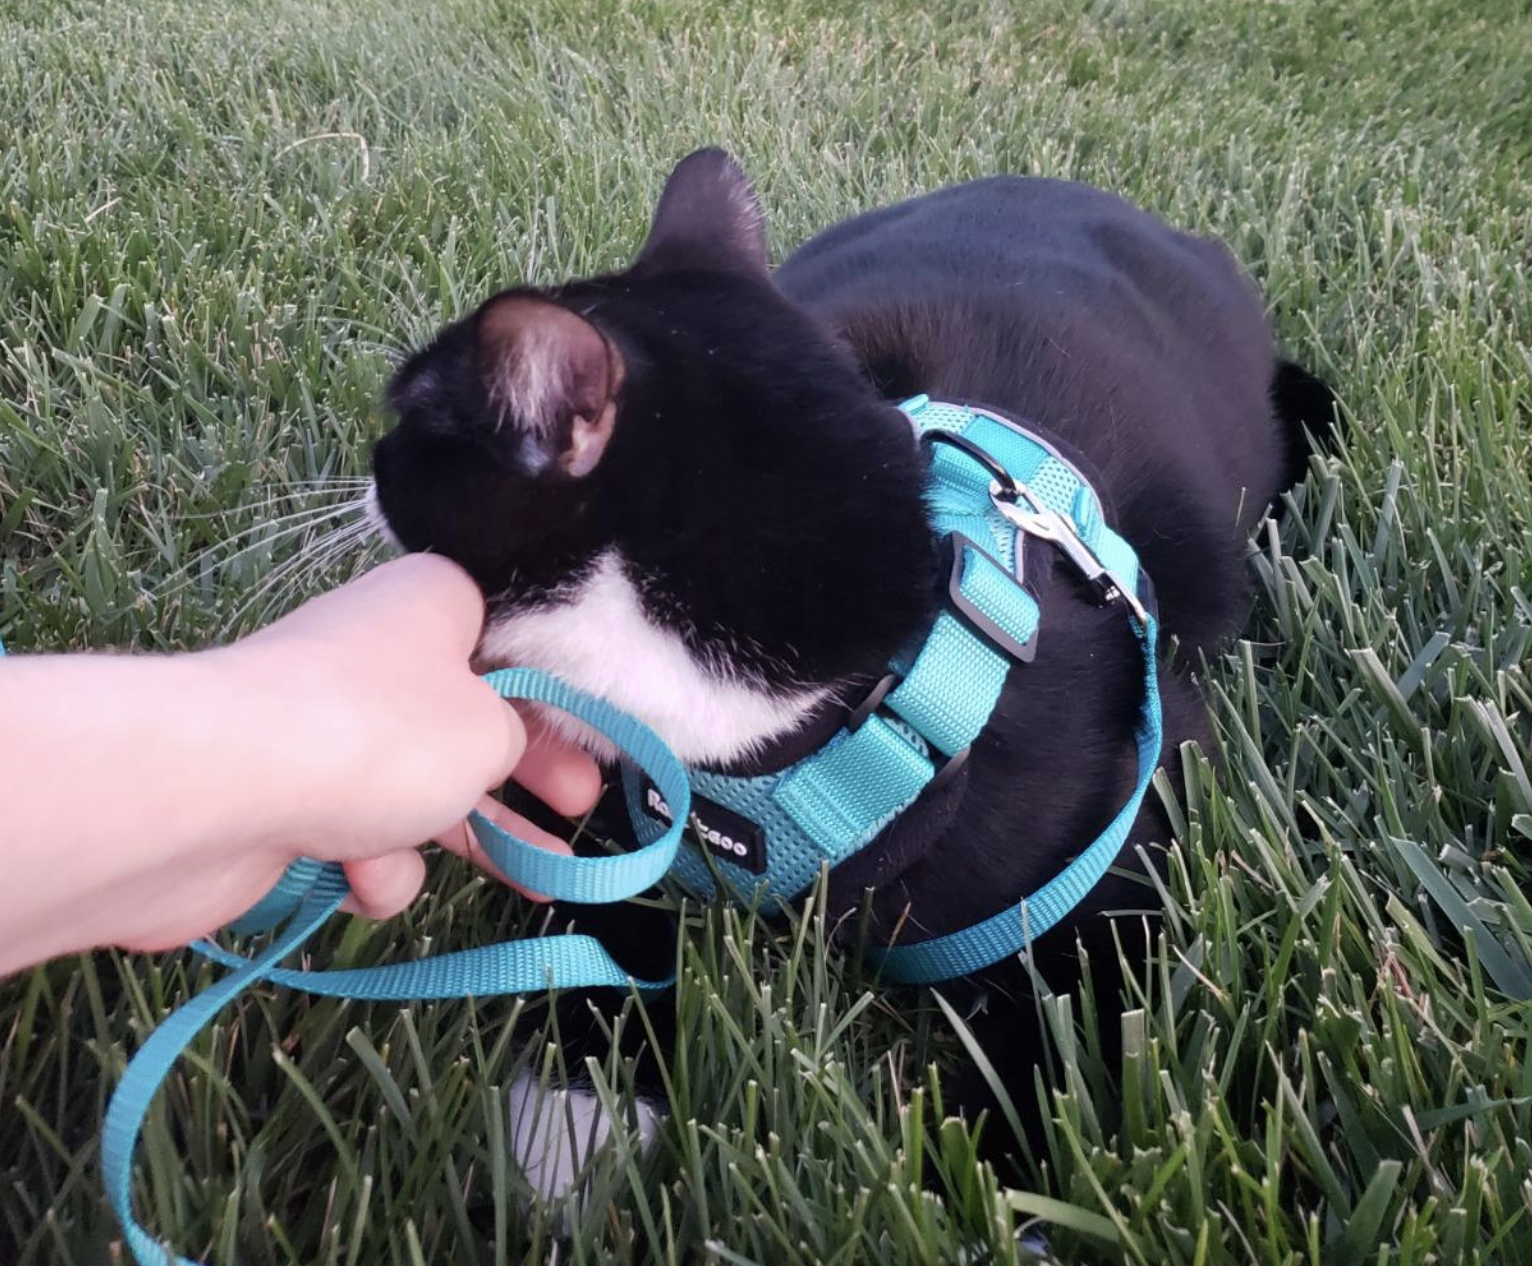 A black and white cat sitting in a field of grass, wearing a turquoise harness and leash